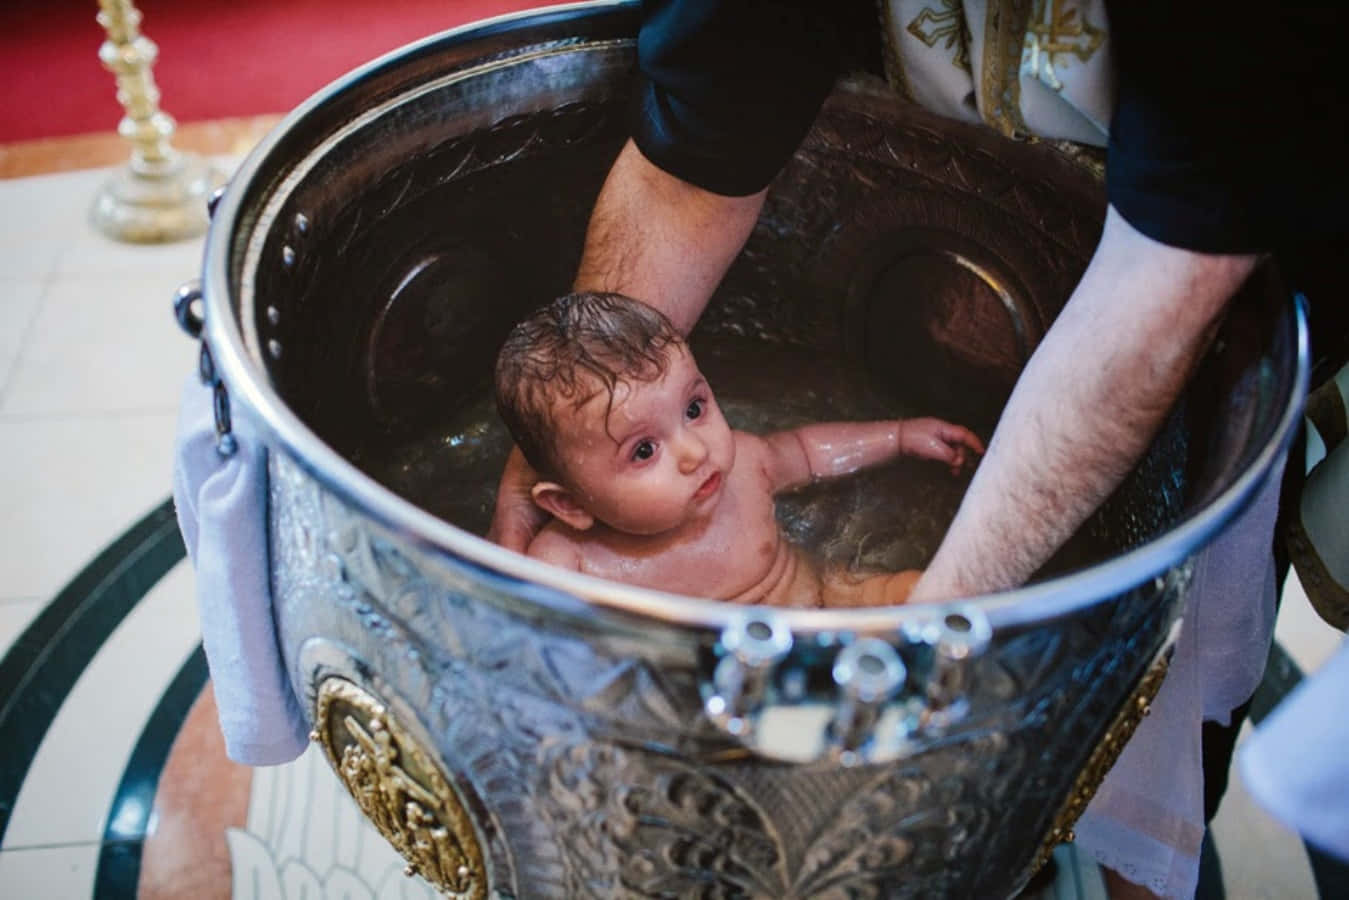 A Baby Being Baptized In A Large Metal Tub